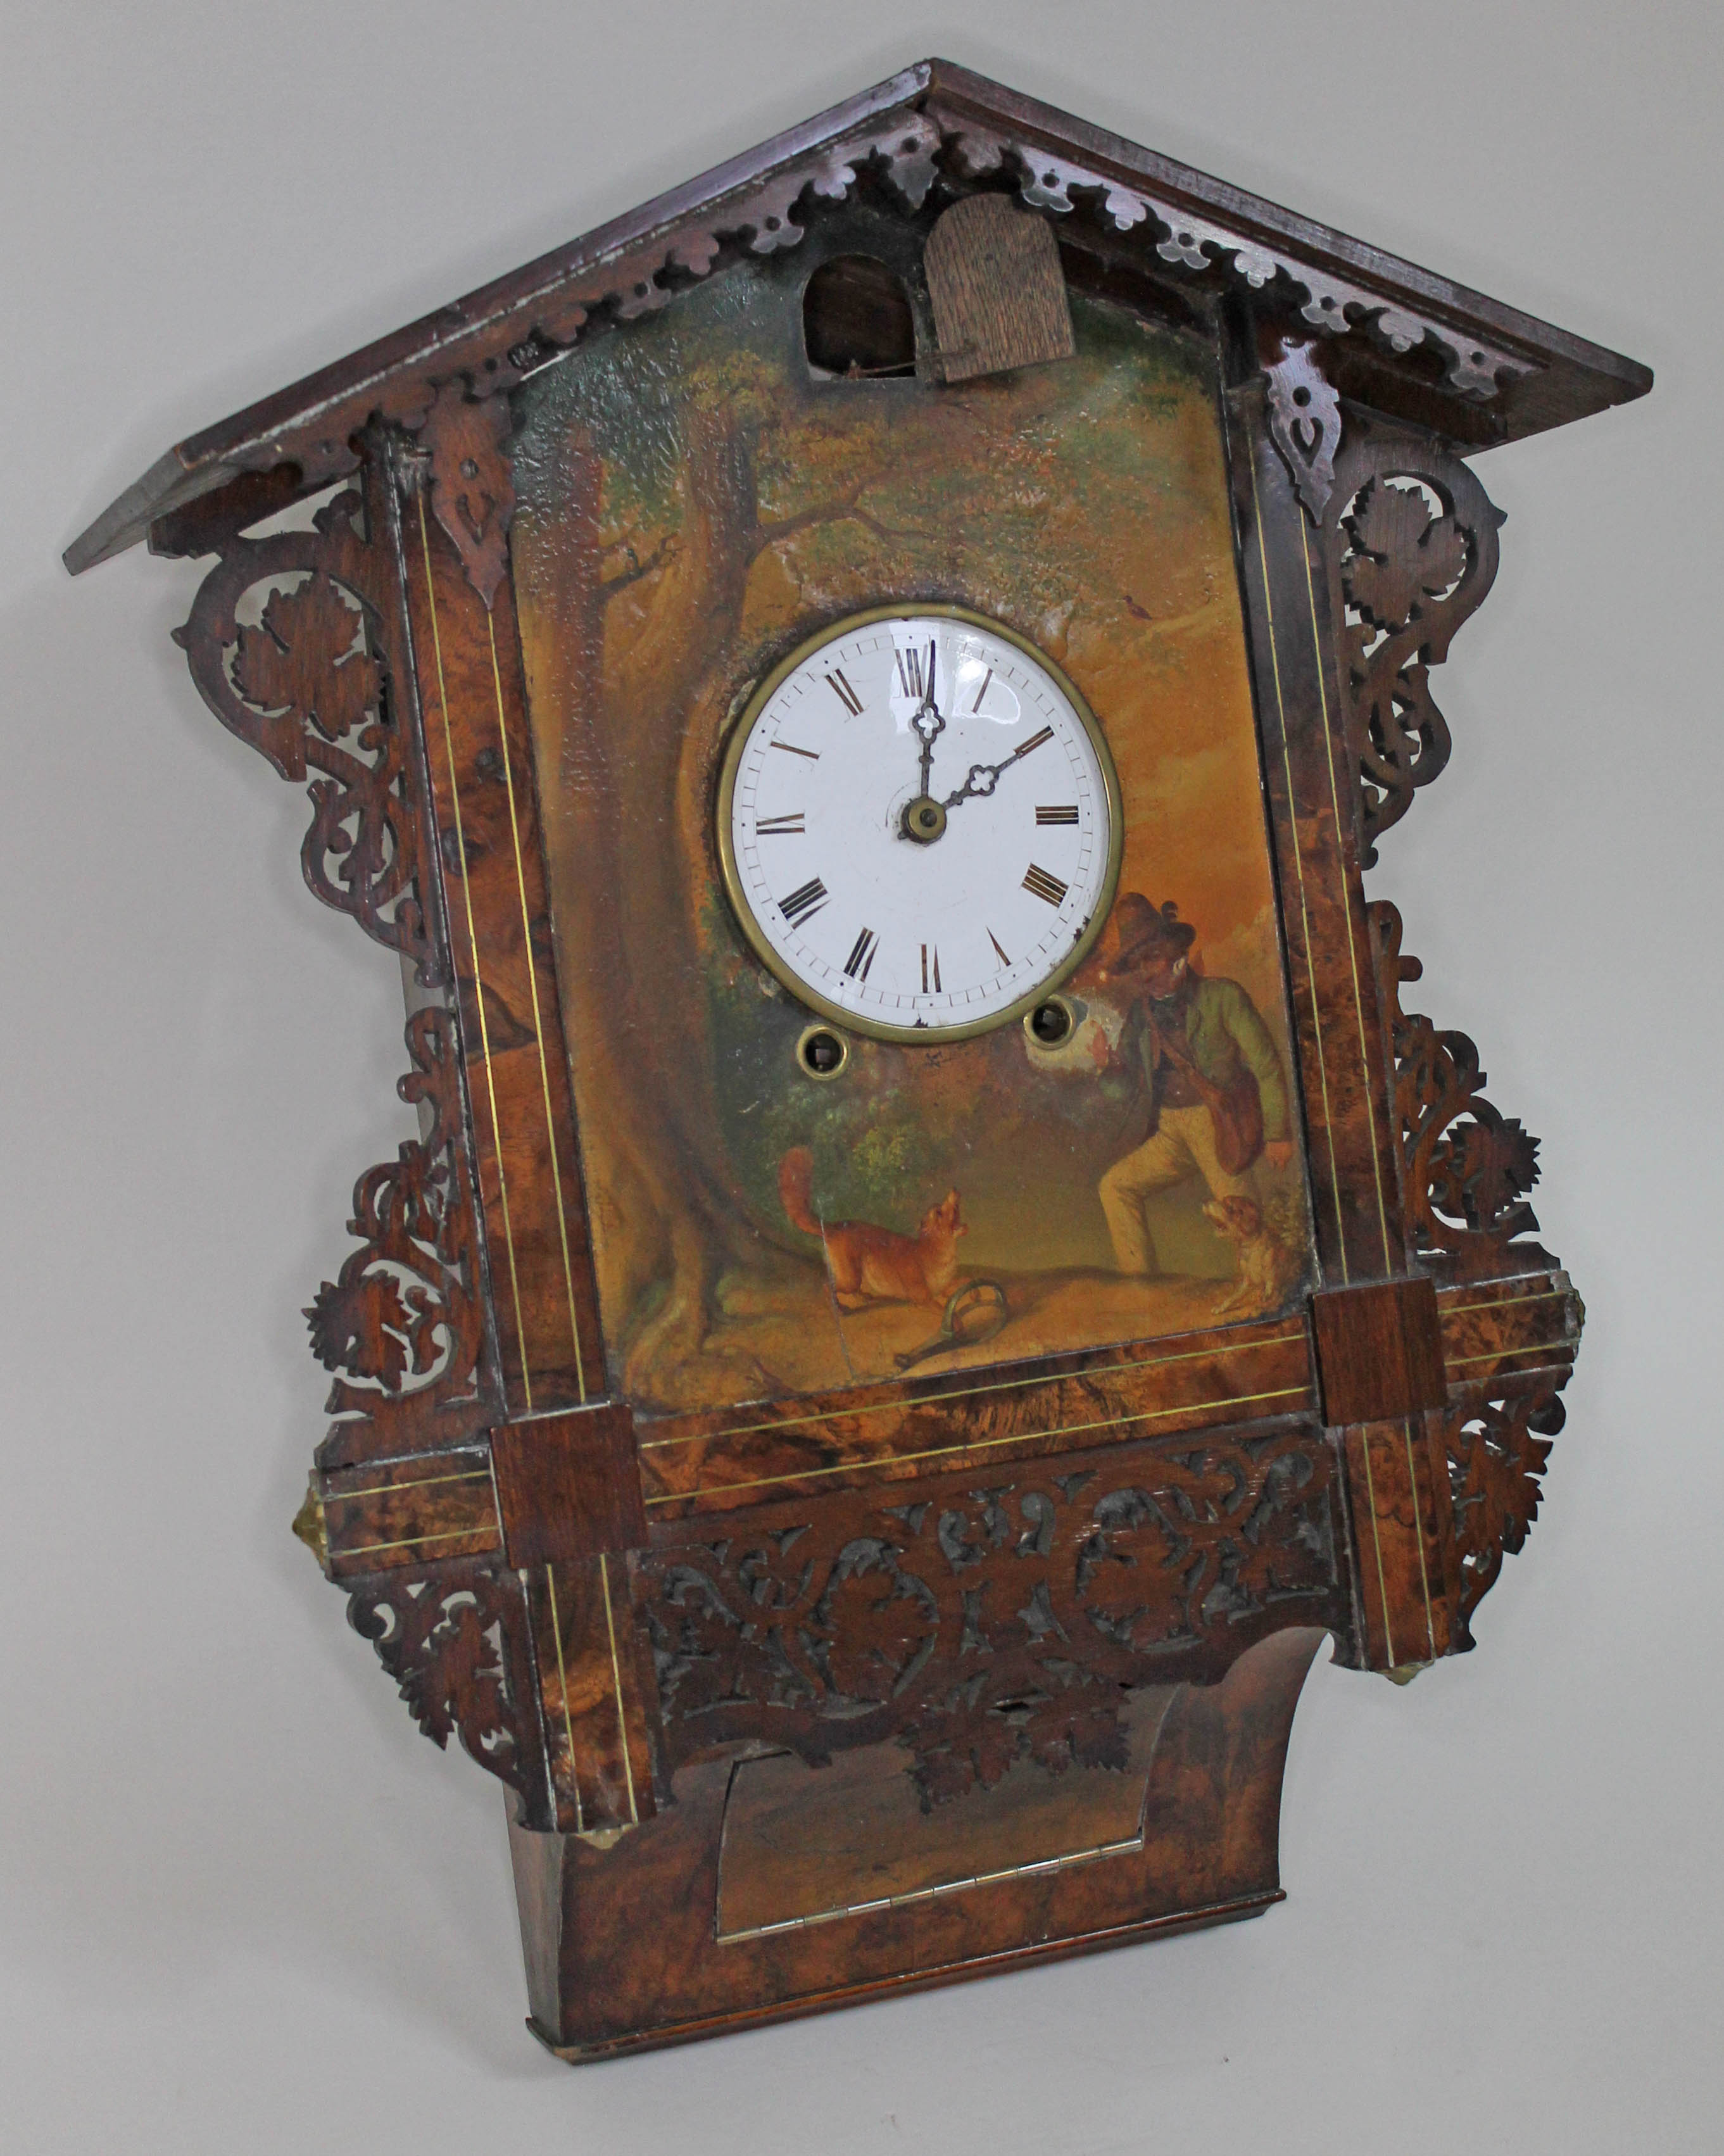 A 19th century Black Forest walnut cuckoo clock, chalet style case with fretwork, 4 1/4" dial